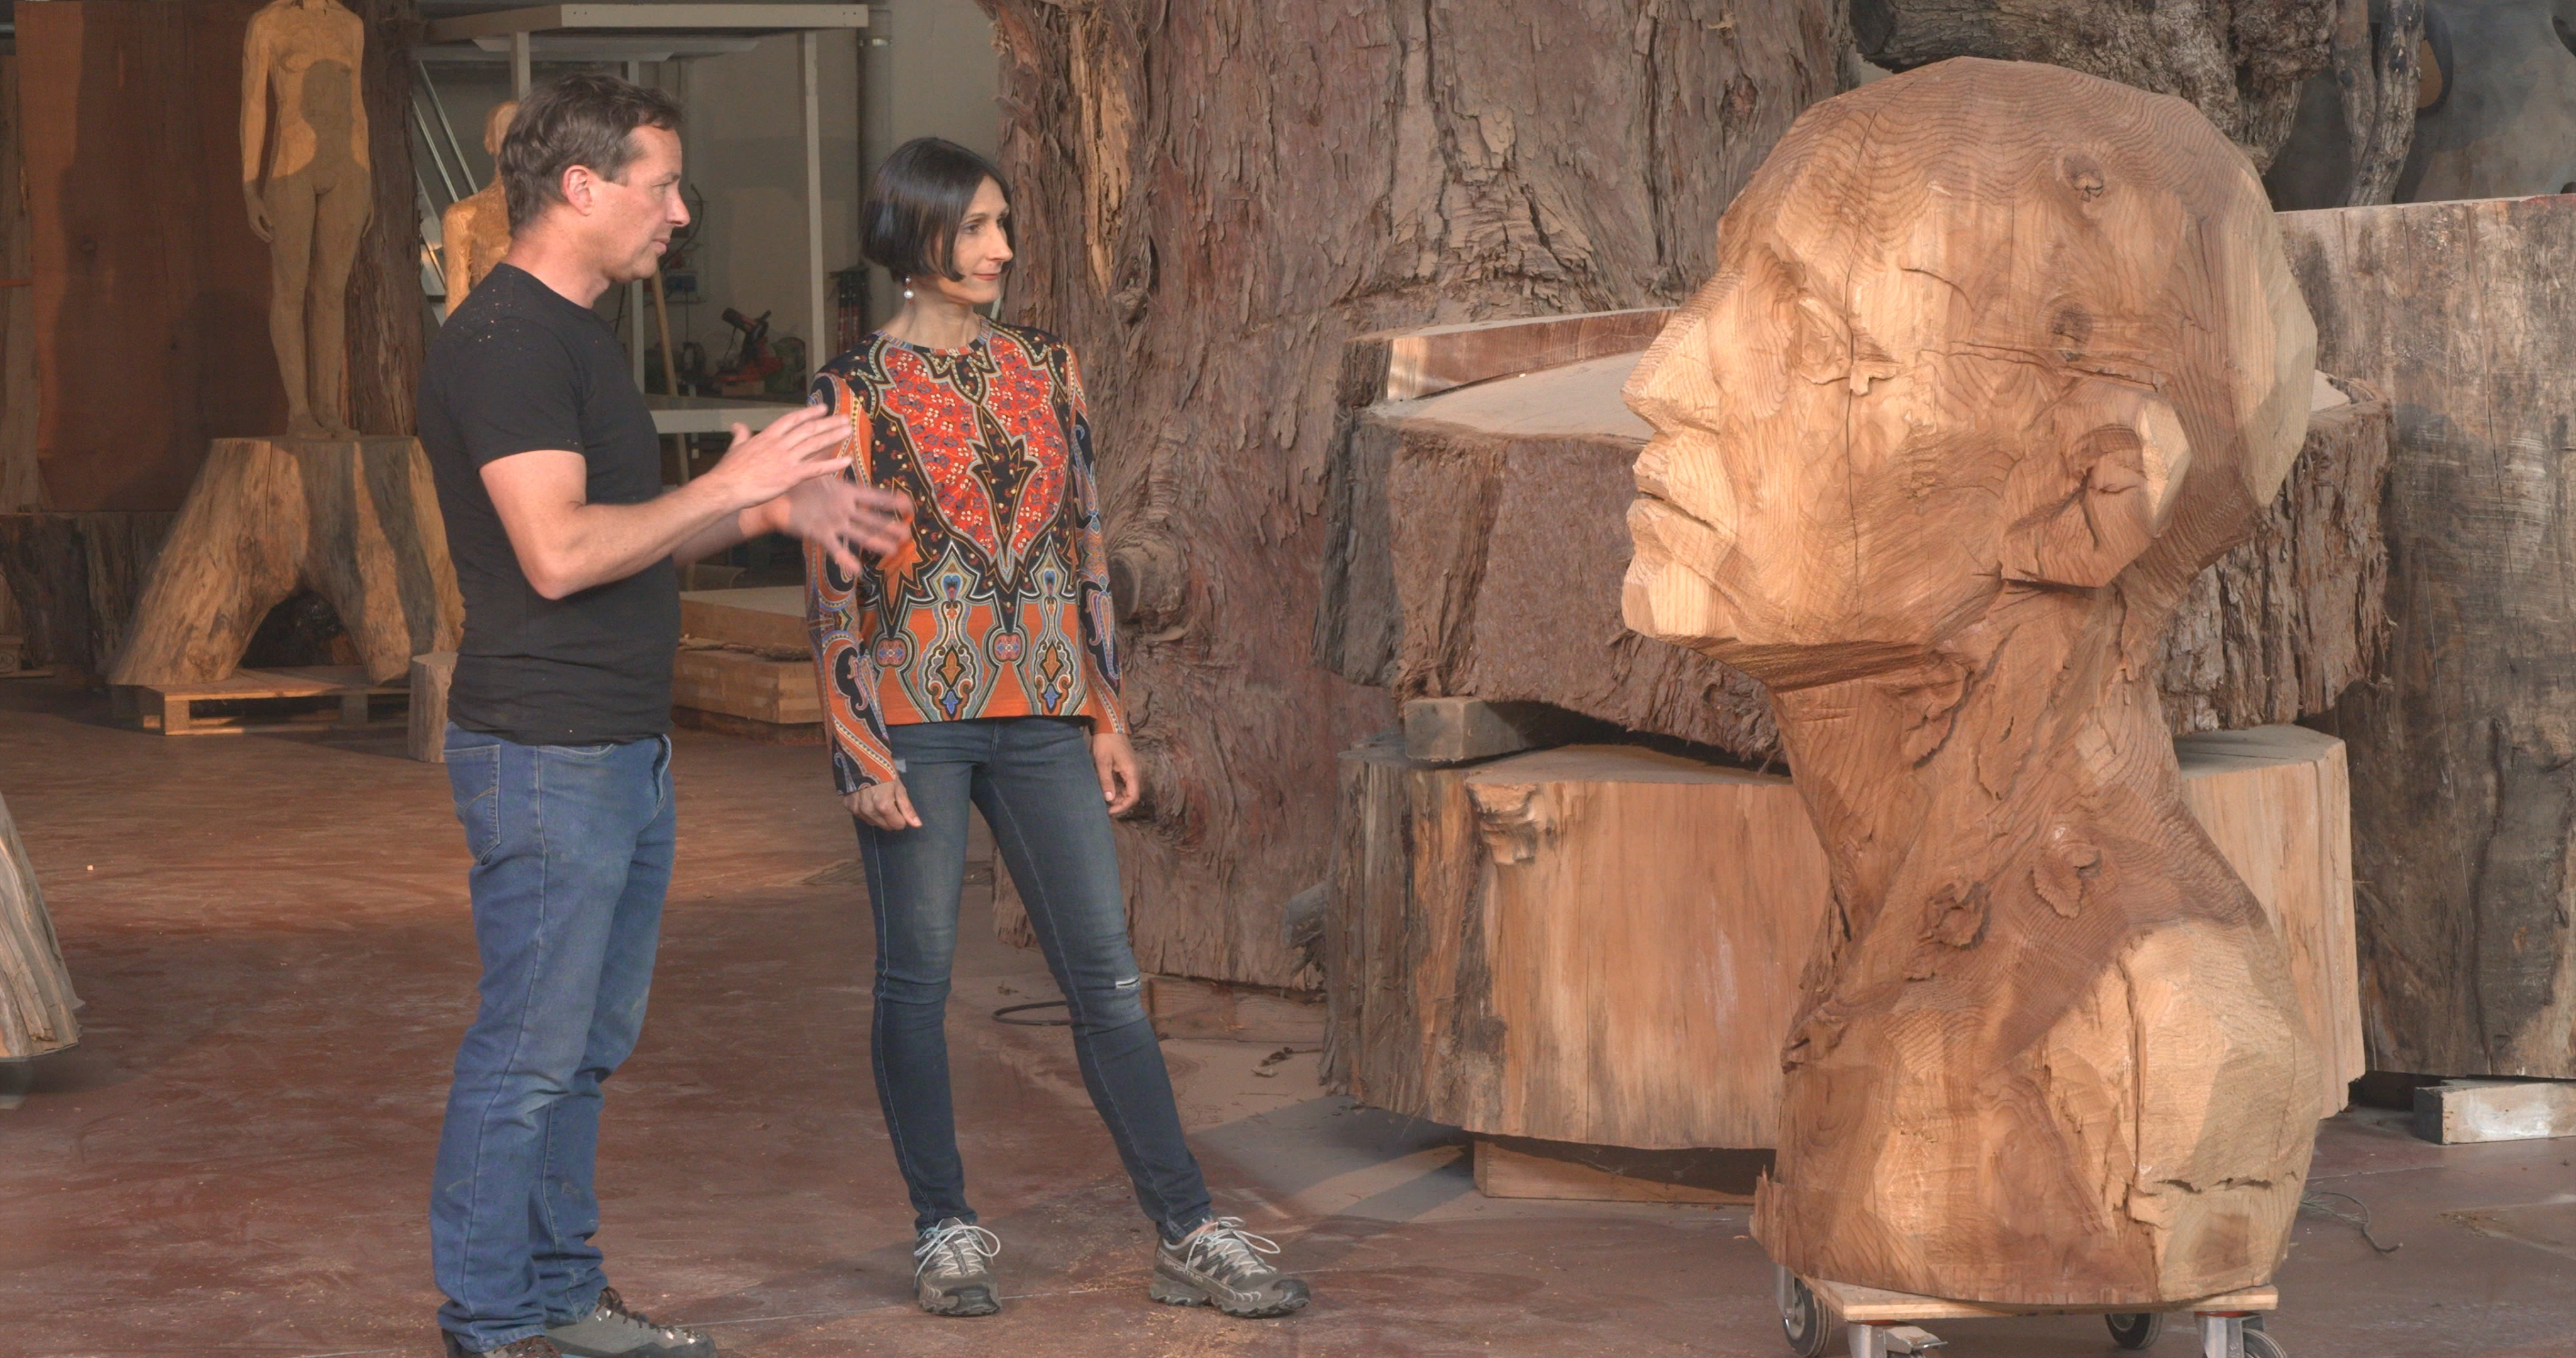 Sculptor Aron Demetz explains his work to Alessandra and the methods he uses to transform wood into pieces with extremely defined expressions.